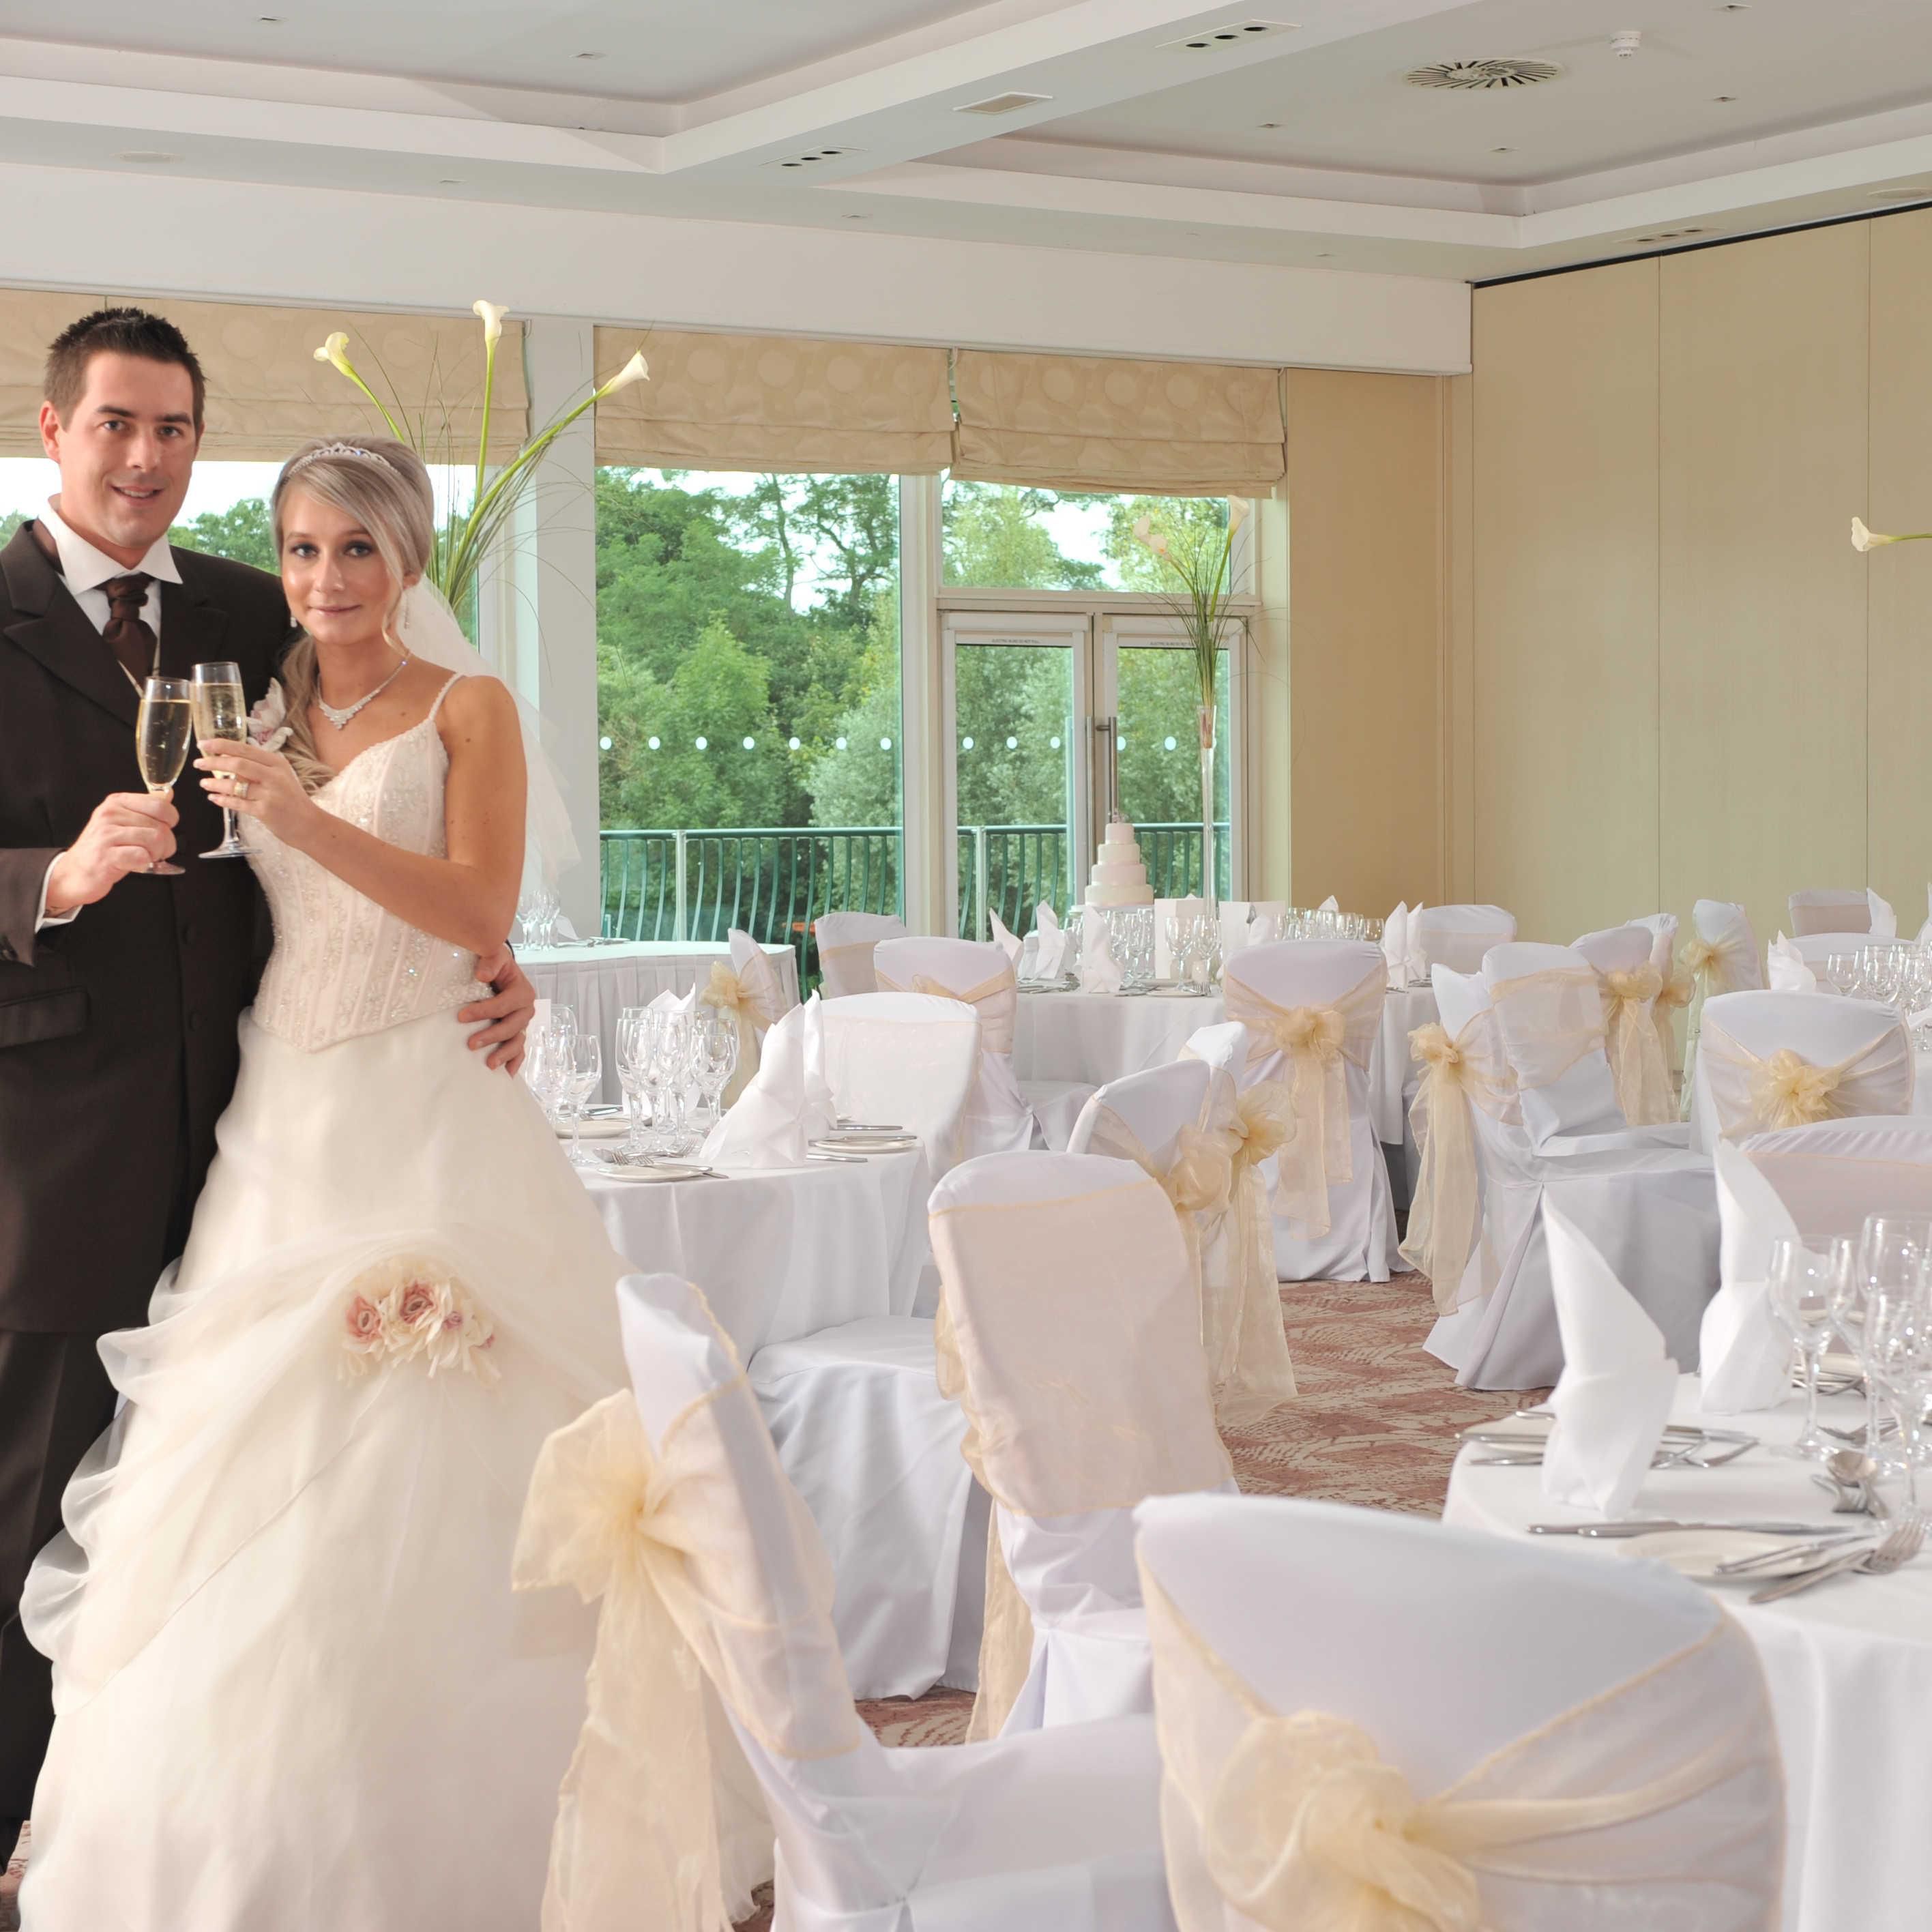 Winterlake Suite - perfect for wedding receptions